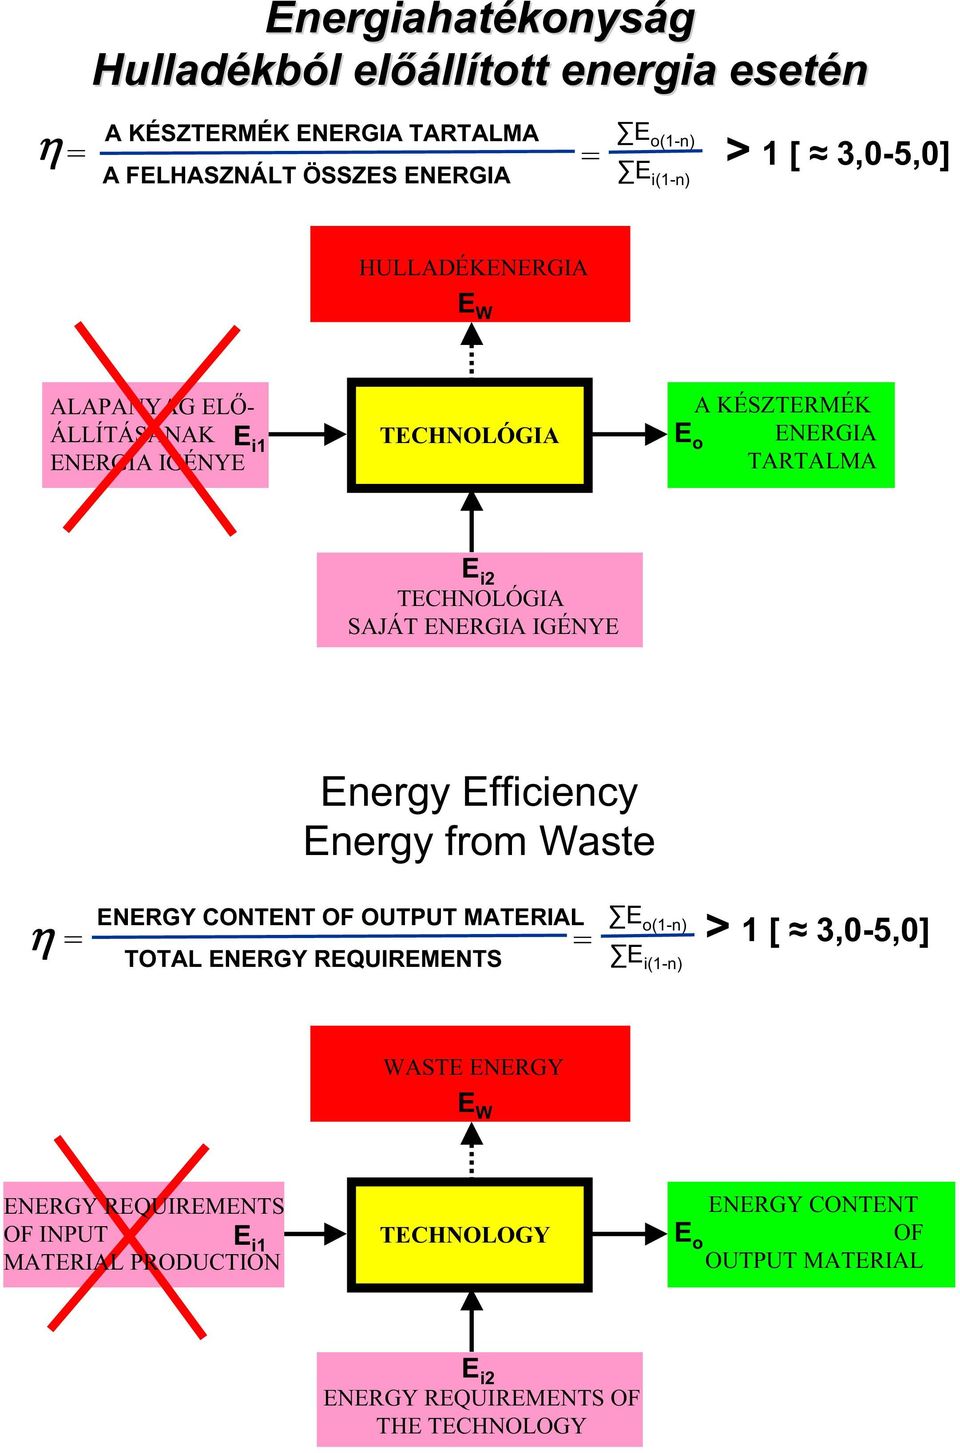 ENERGIA IGÉNYE Energy Efficiency Energy from Waste = ENERGY CONTENT OF OUTPUT MATERIAL = E o(1-n) TOTAL ENERGY REQUIREMENTS E i(1-n) > 1 [ 3,0-5,0]